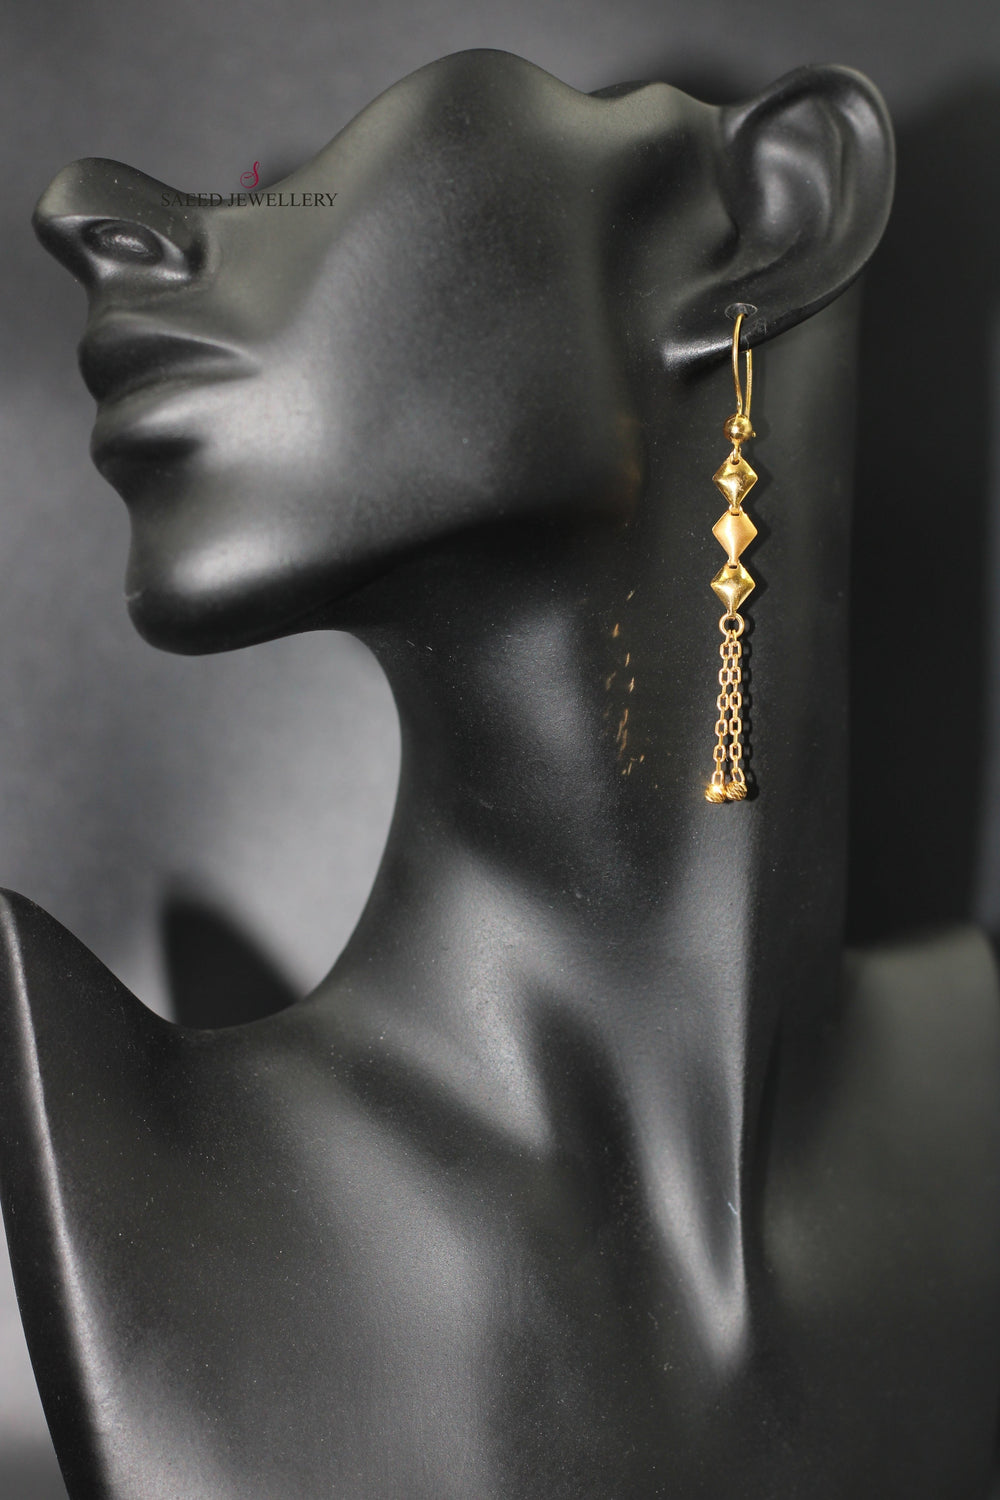 21K Fancy Earrings Made of 21K Yellow Gold by Saeed Jewelry-حلق-سوبر-اكسترا-4